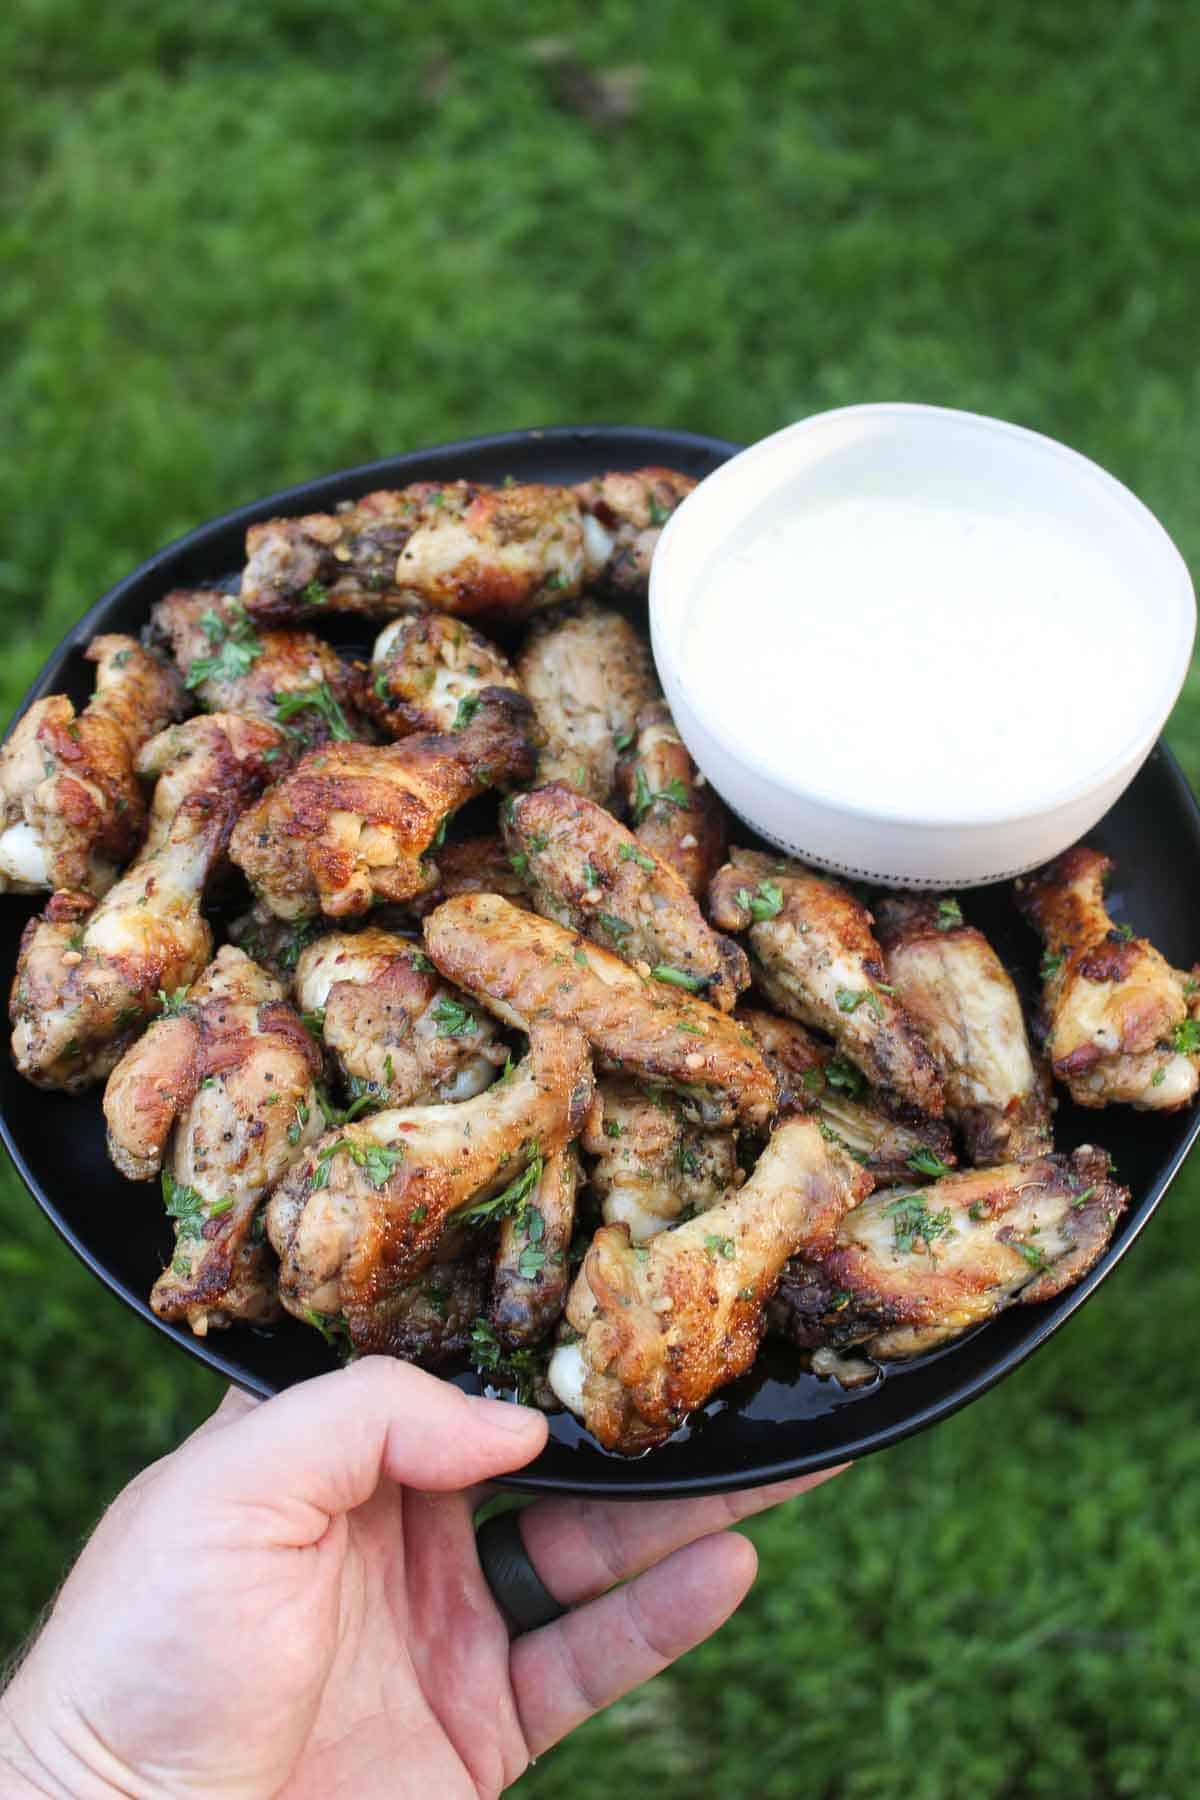 Fire Baked Chimichurri chicken wings cooked in a pizza oven ready to serve.